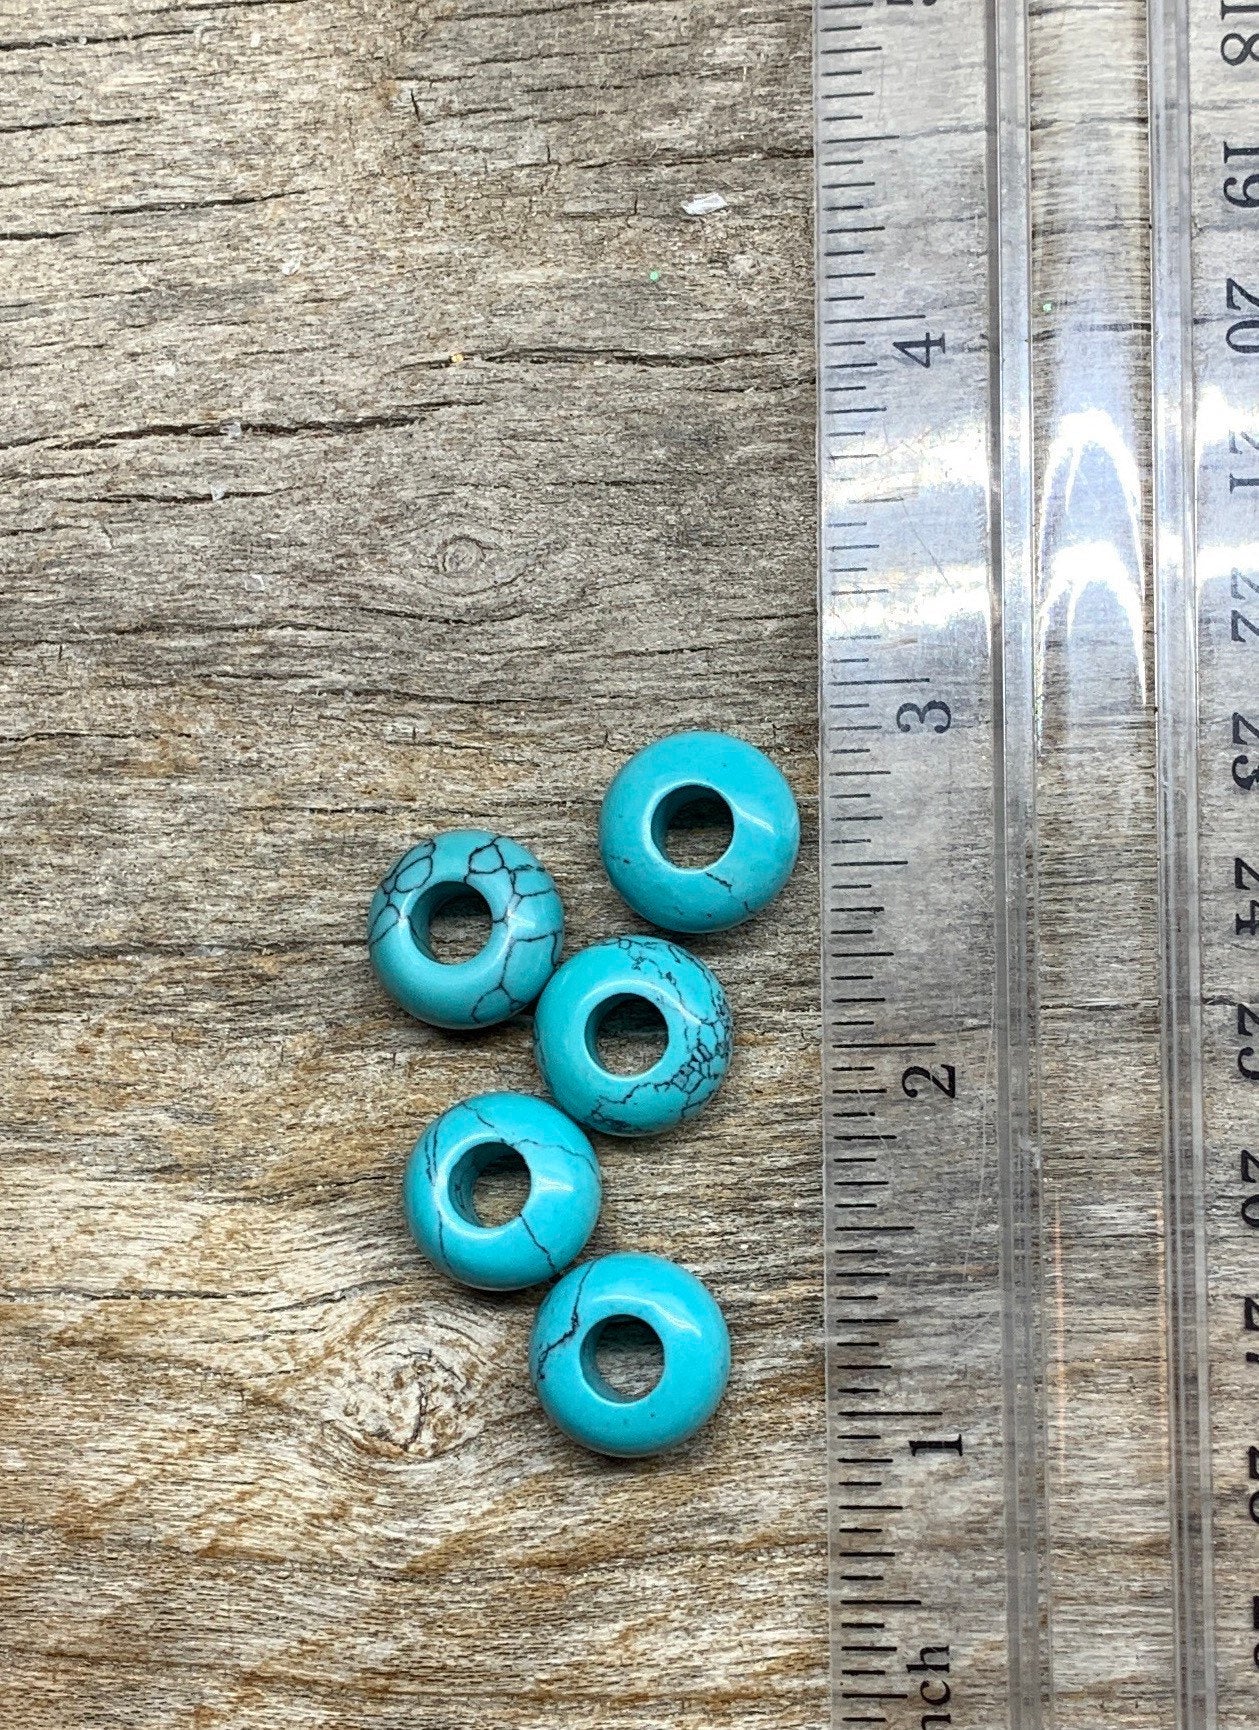 "Close-up of 14mm blue howlite crystal beads, showcasing their vibrant blue color and unique marbled patterns, positioned next to a ruler to show size